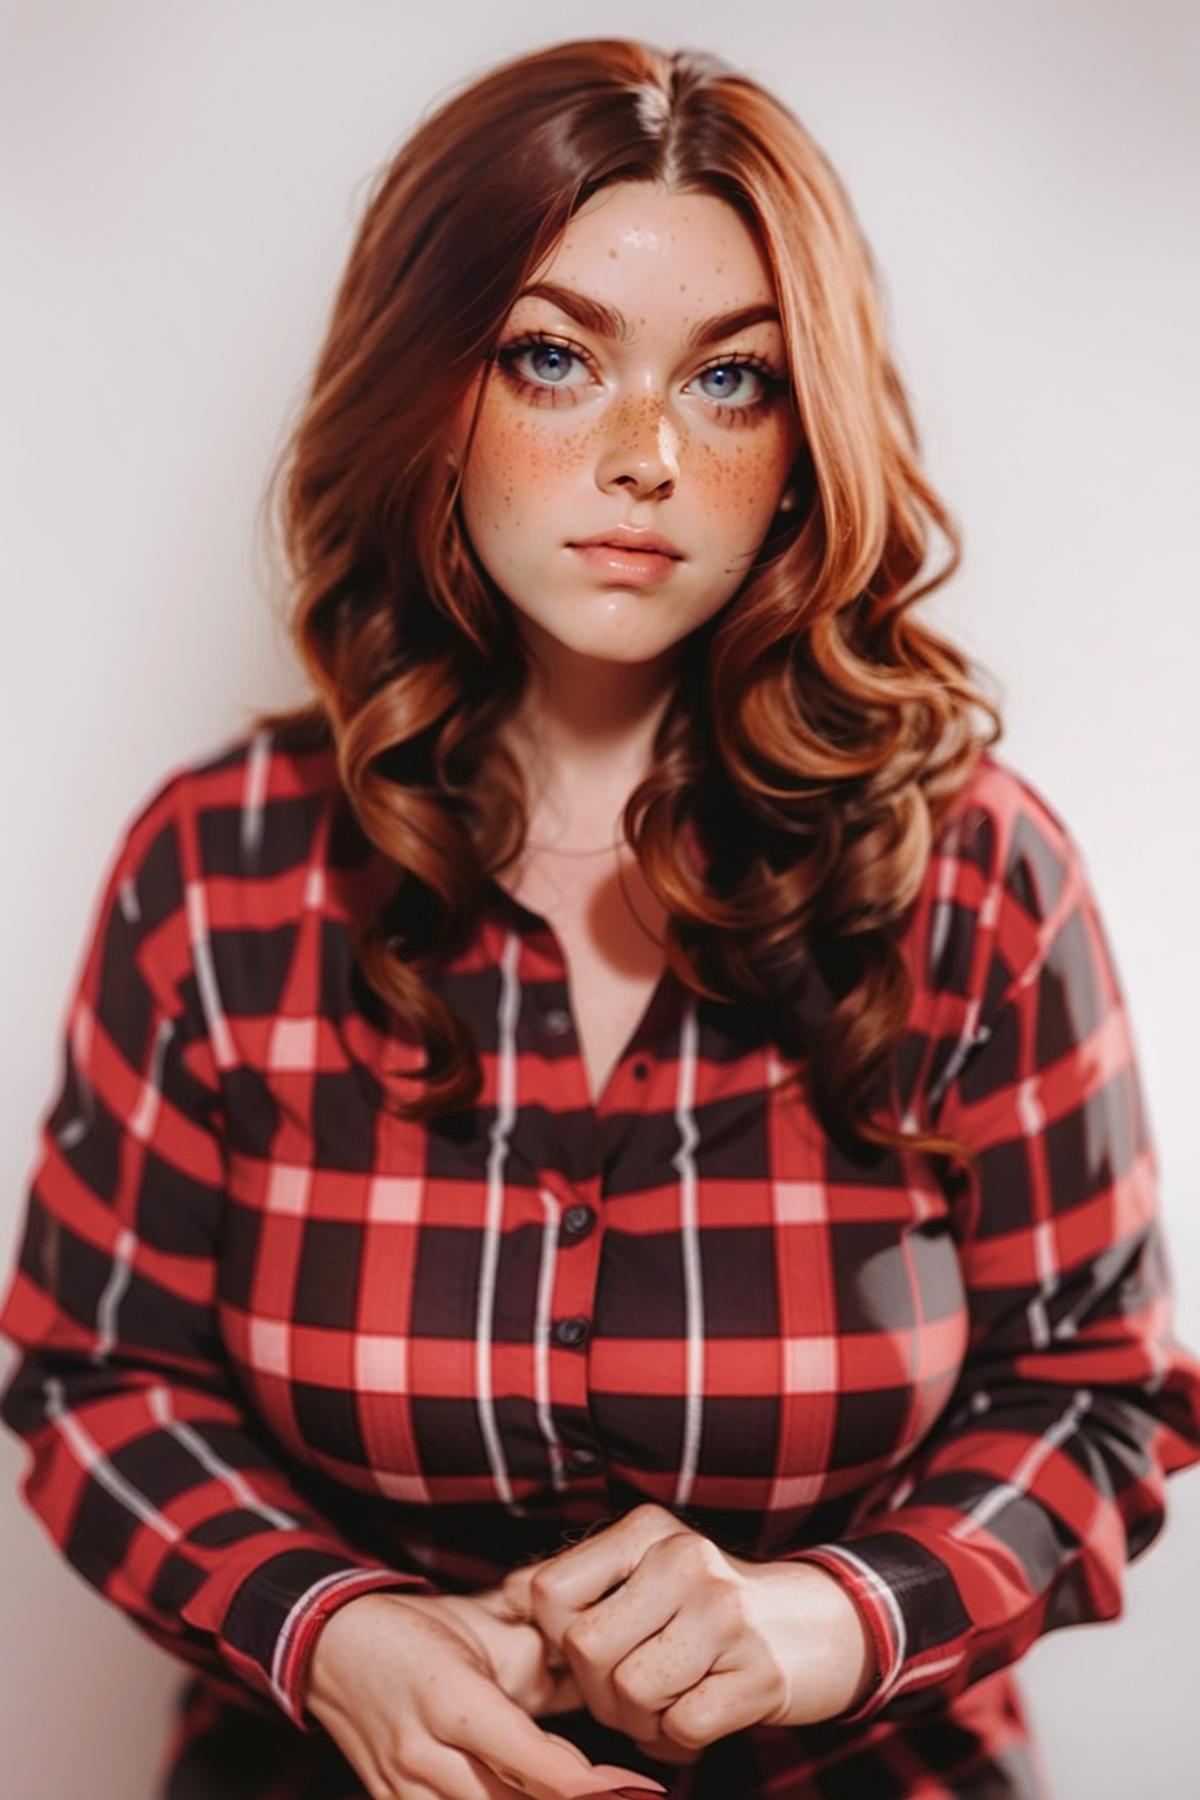 Flannel image by freckledvixon